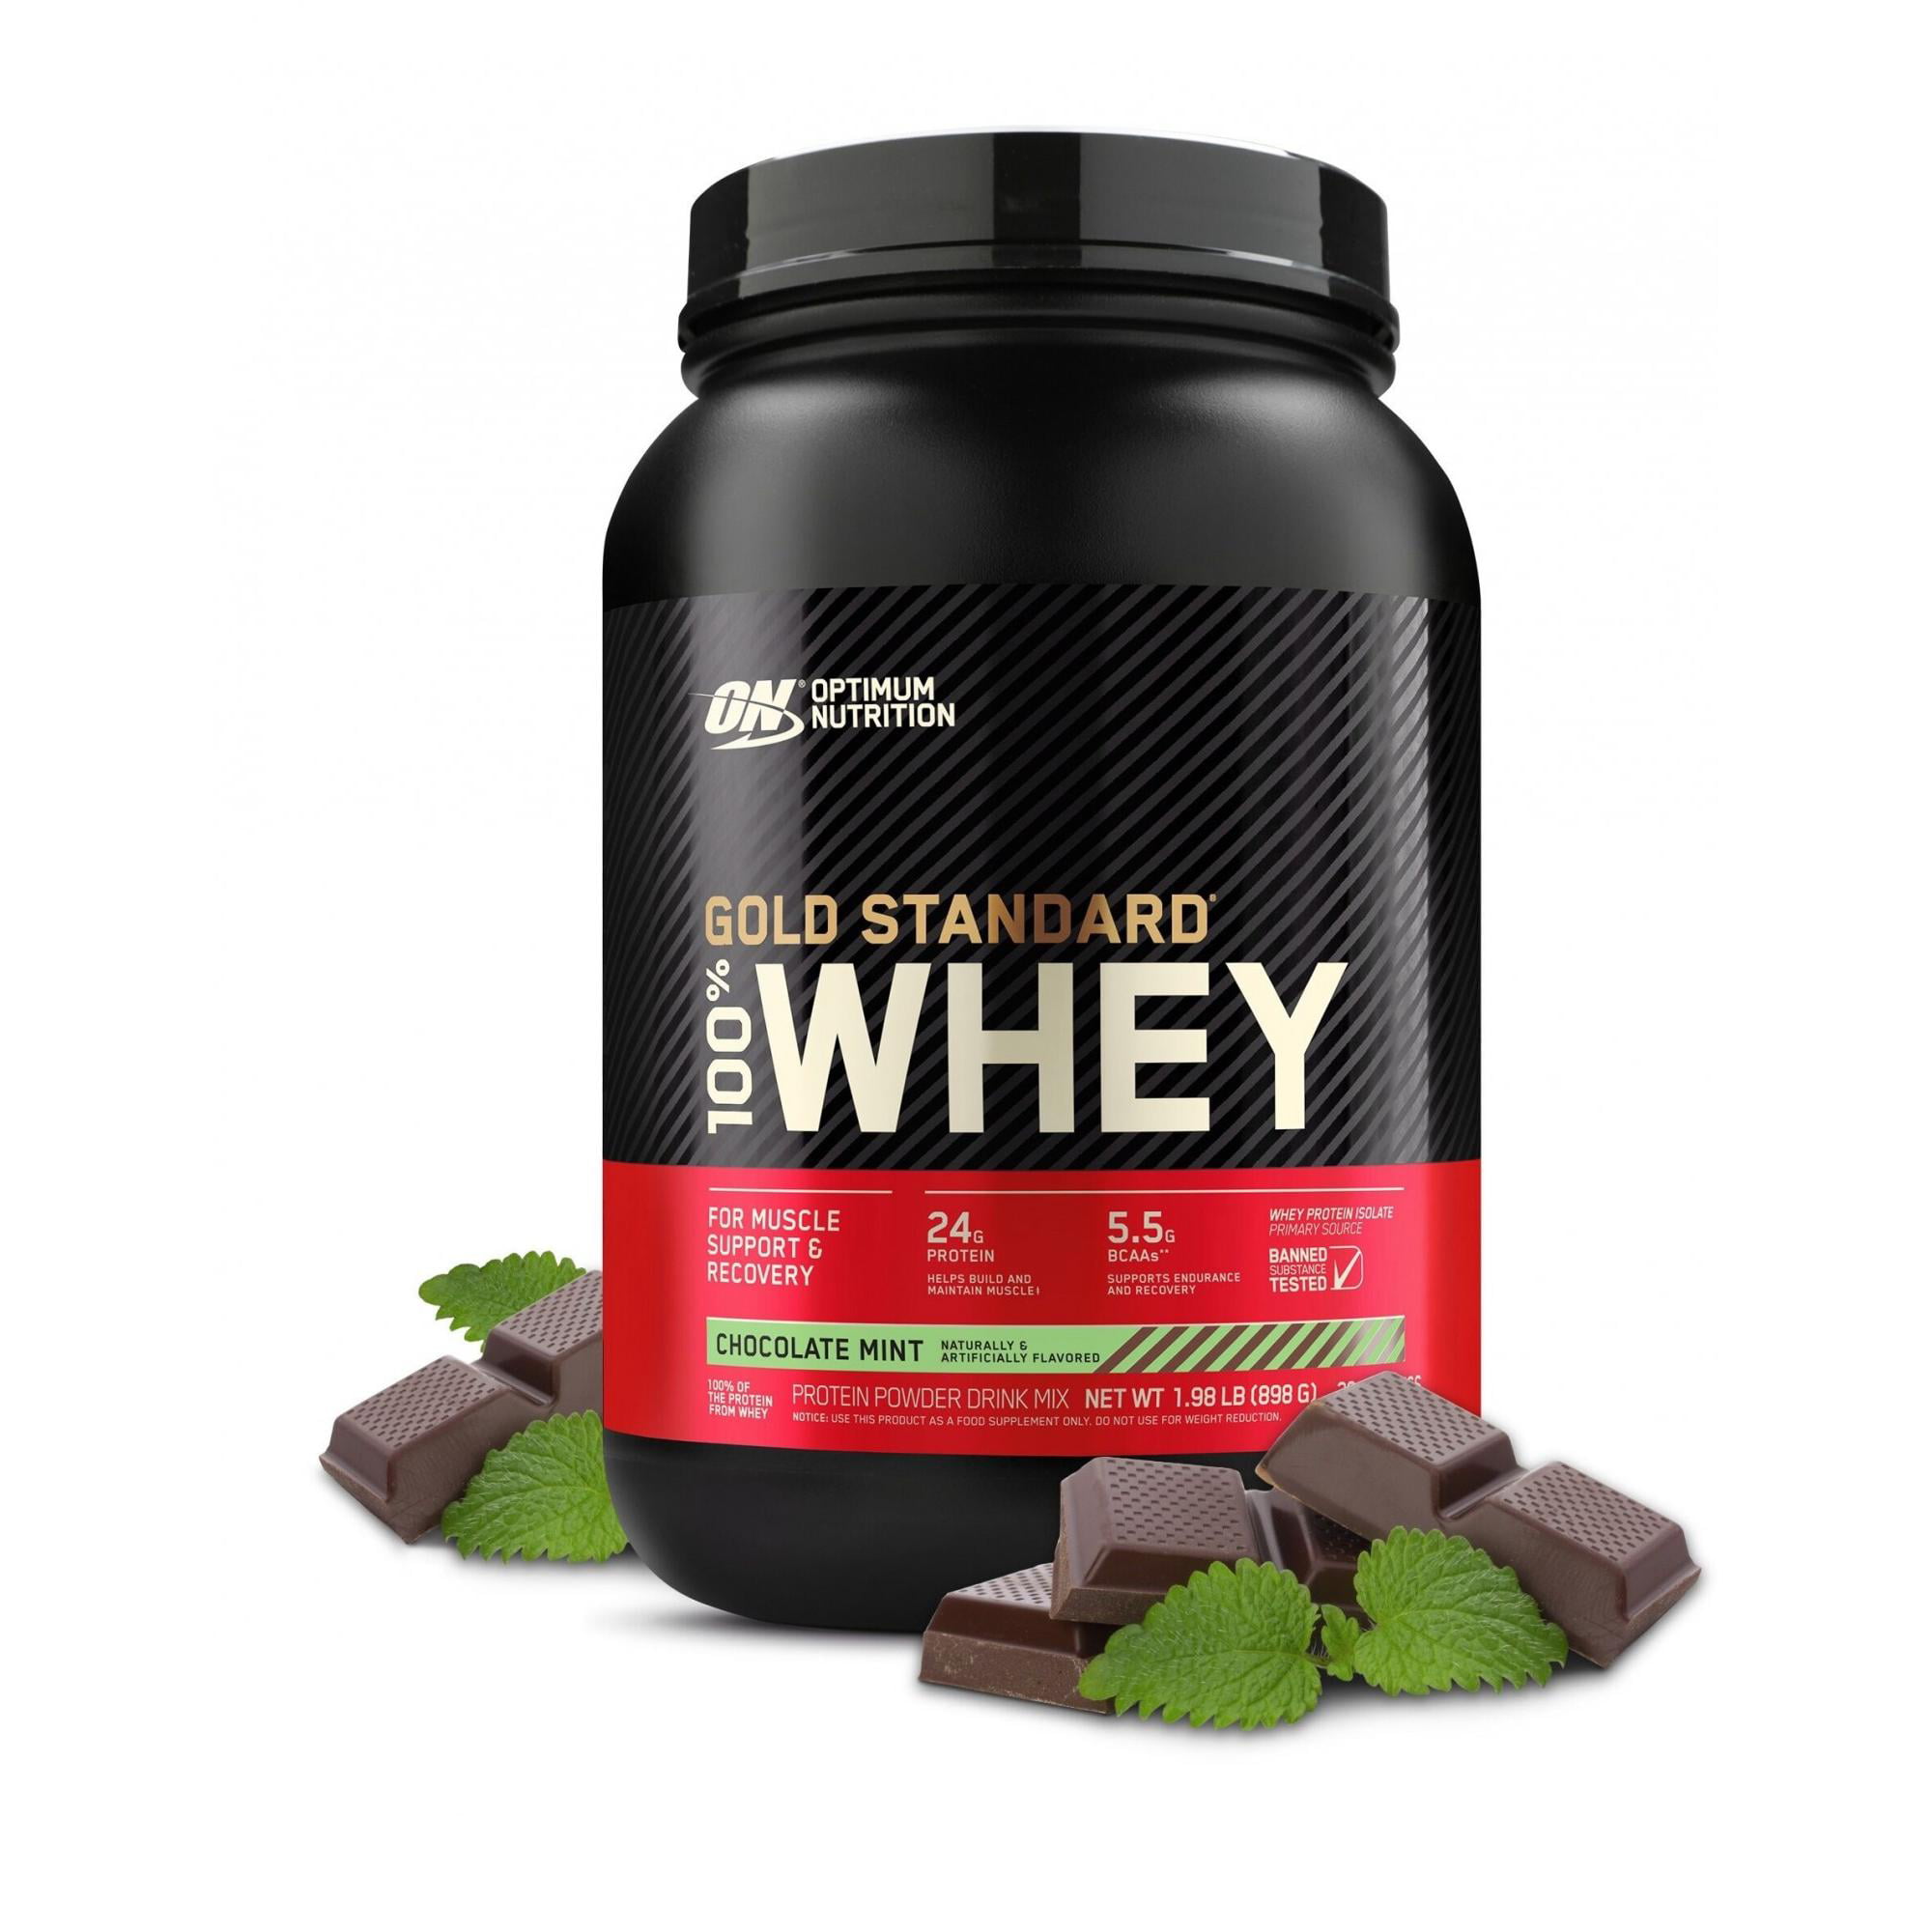 Images for Whey Protein Powder Nutrition Facts.